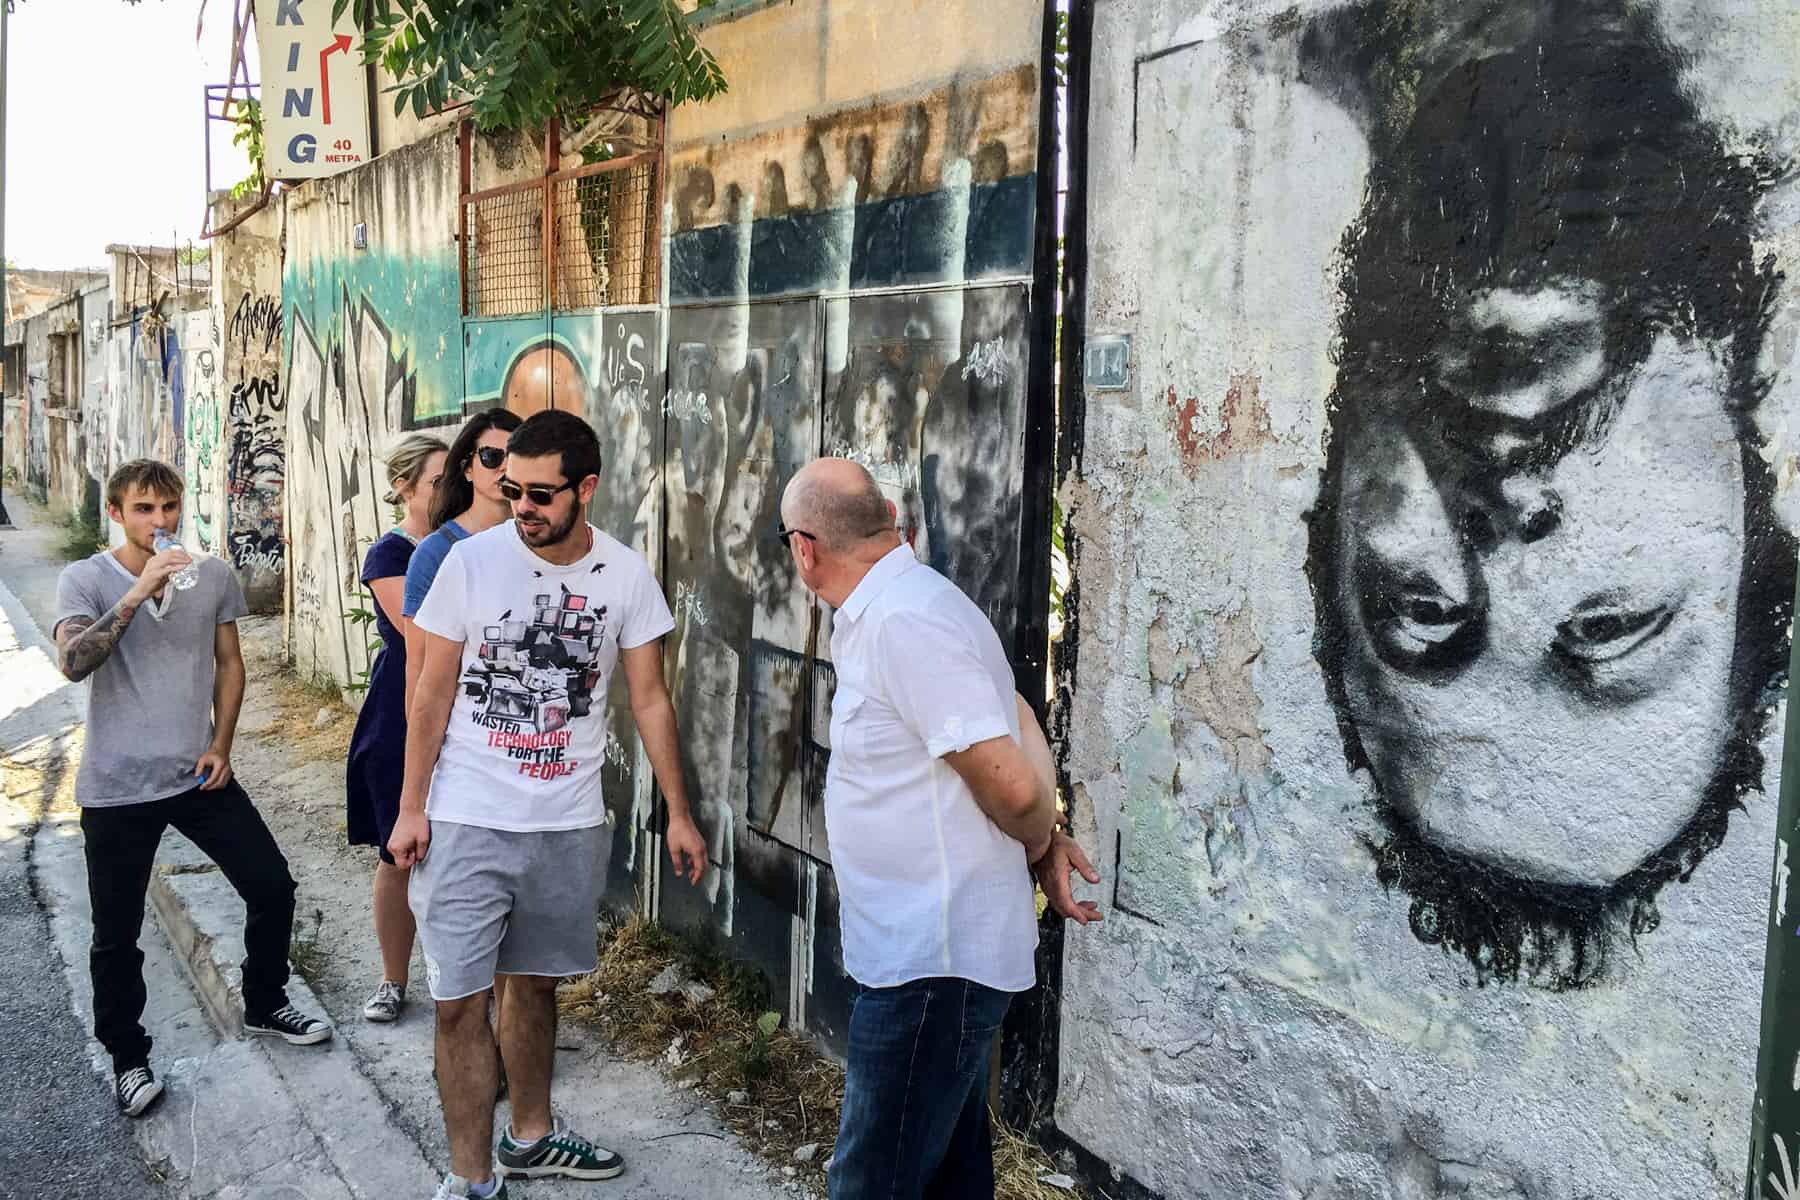 People looking at wall murals during an Athens street art walking tour.